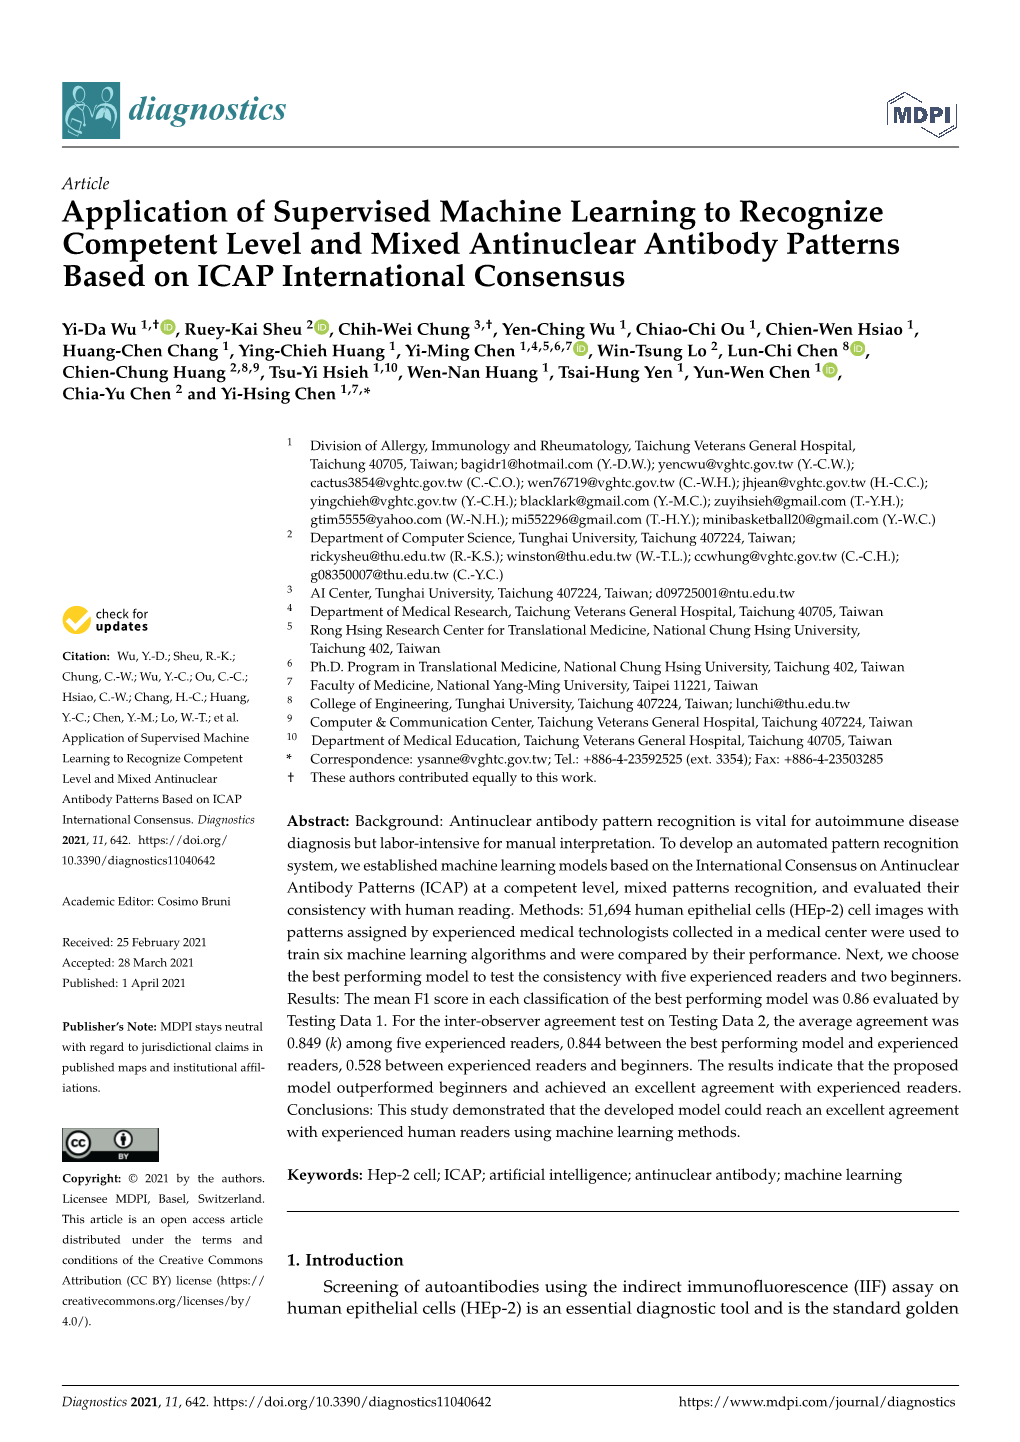 Application of Supervised Machine Learning to Recognize Competent Level and Mixed Antinuclear Antibody Patterns Based on ICAP International Consensus